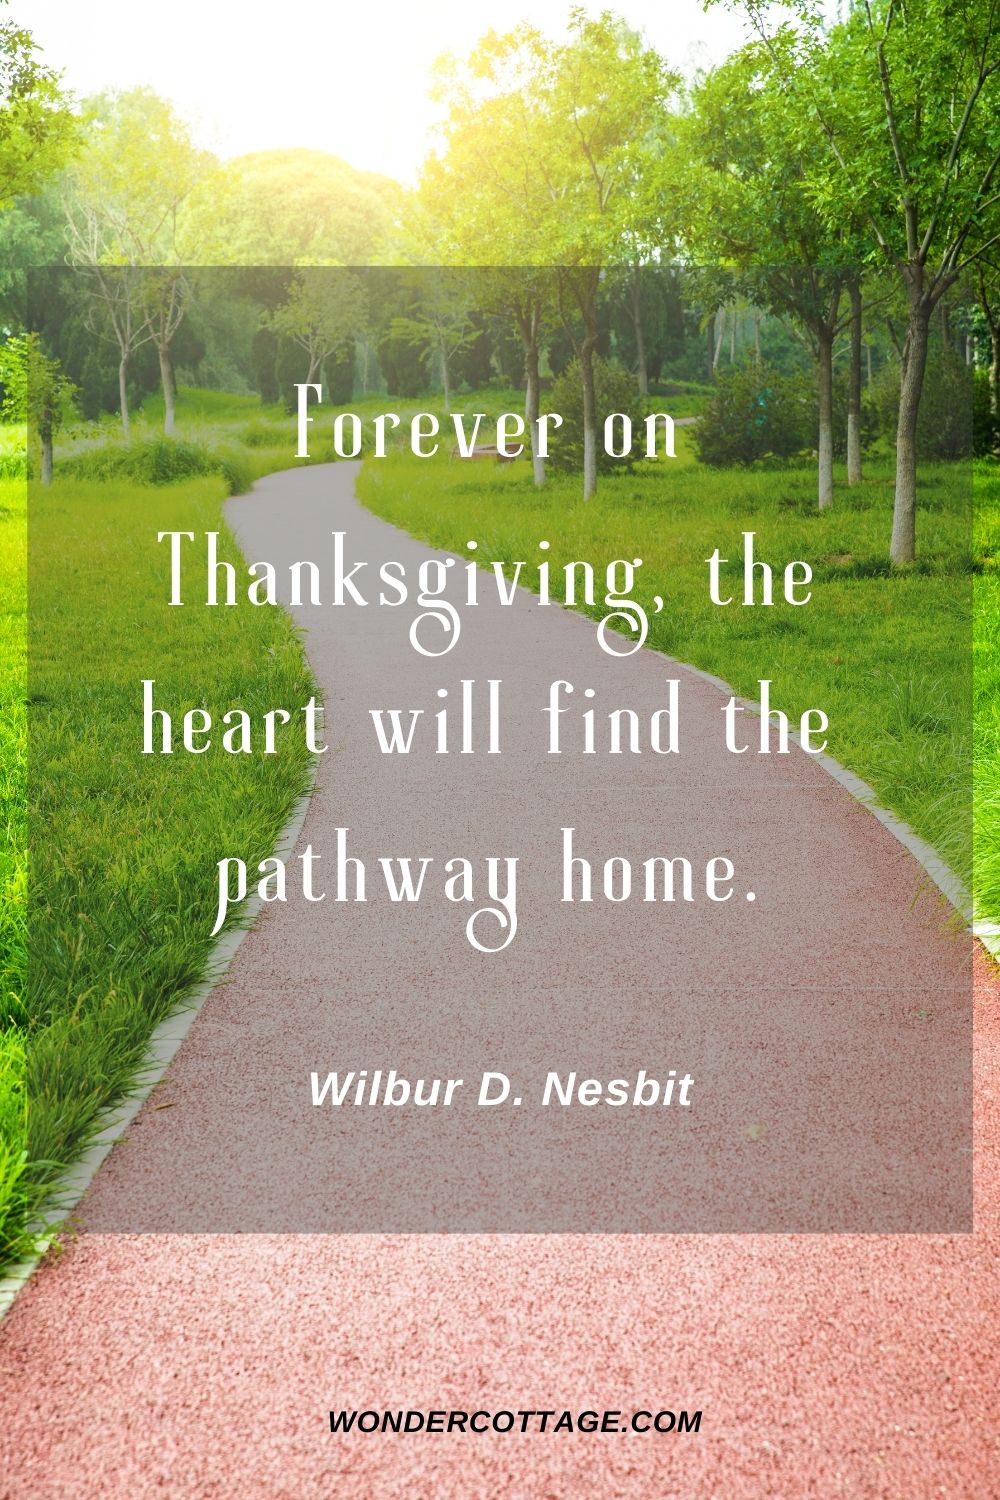 Forever on Thanksgiving, the heart will find the pathway home. Wilbur D. Nesbit